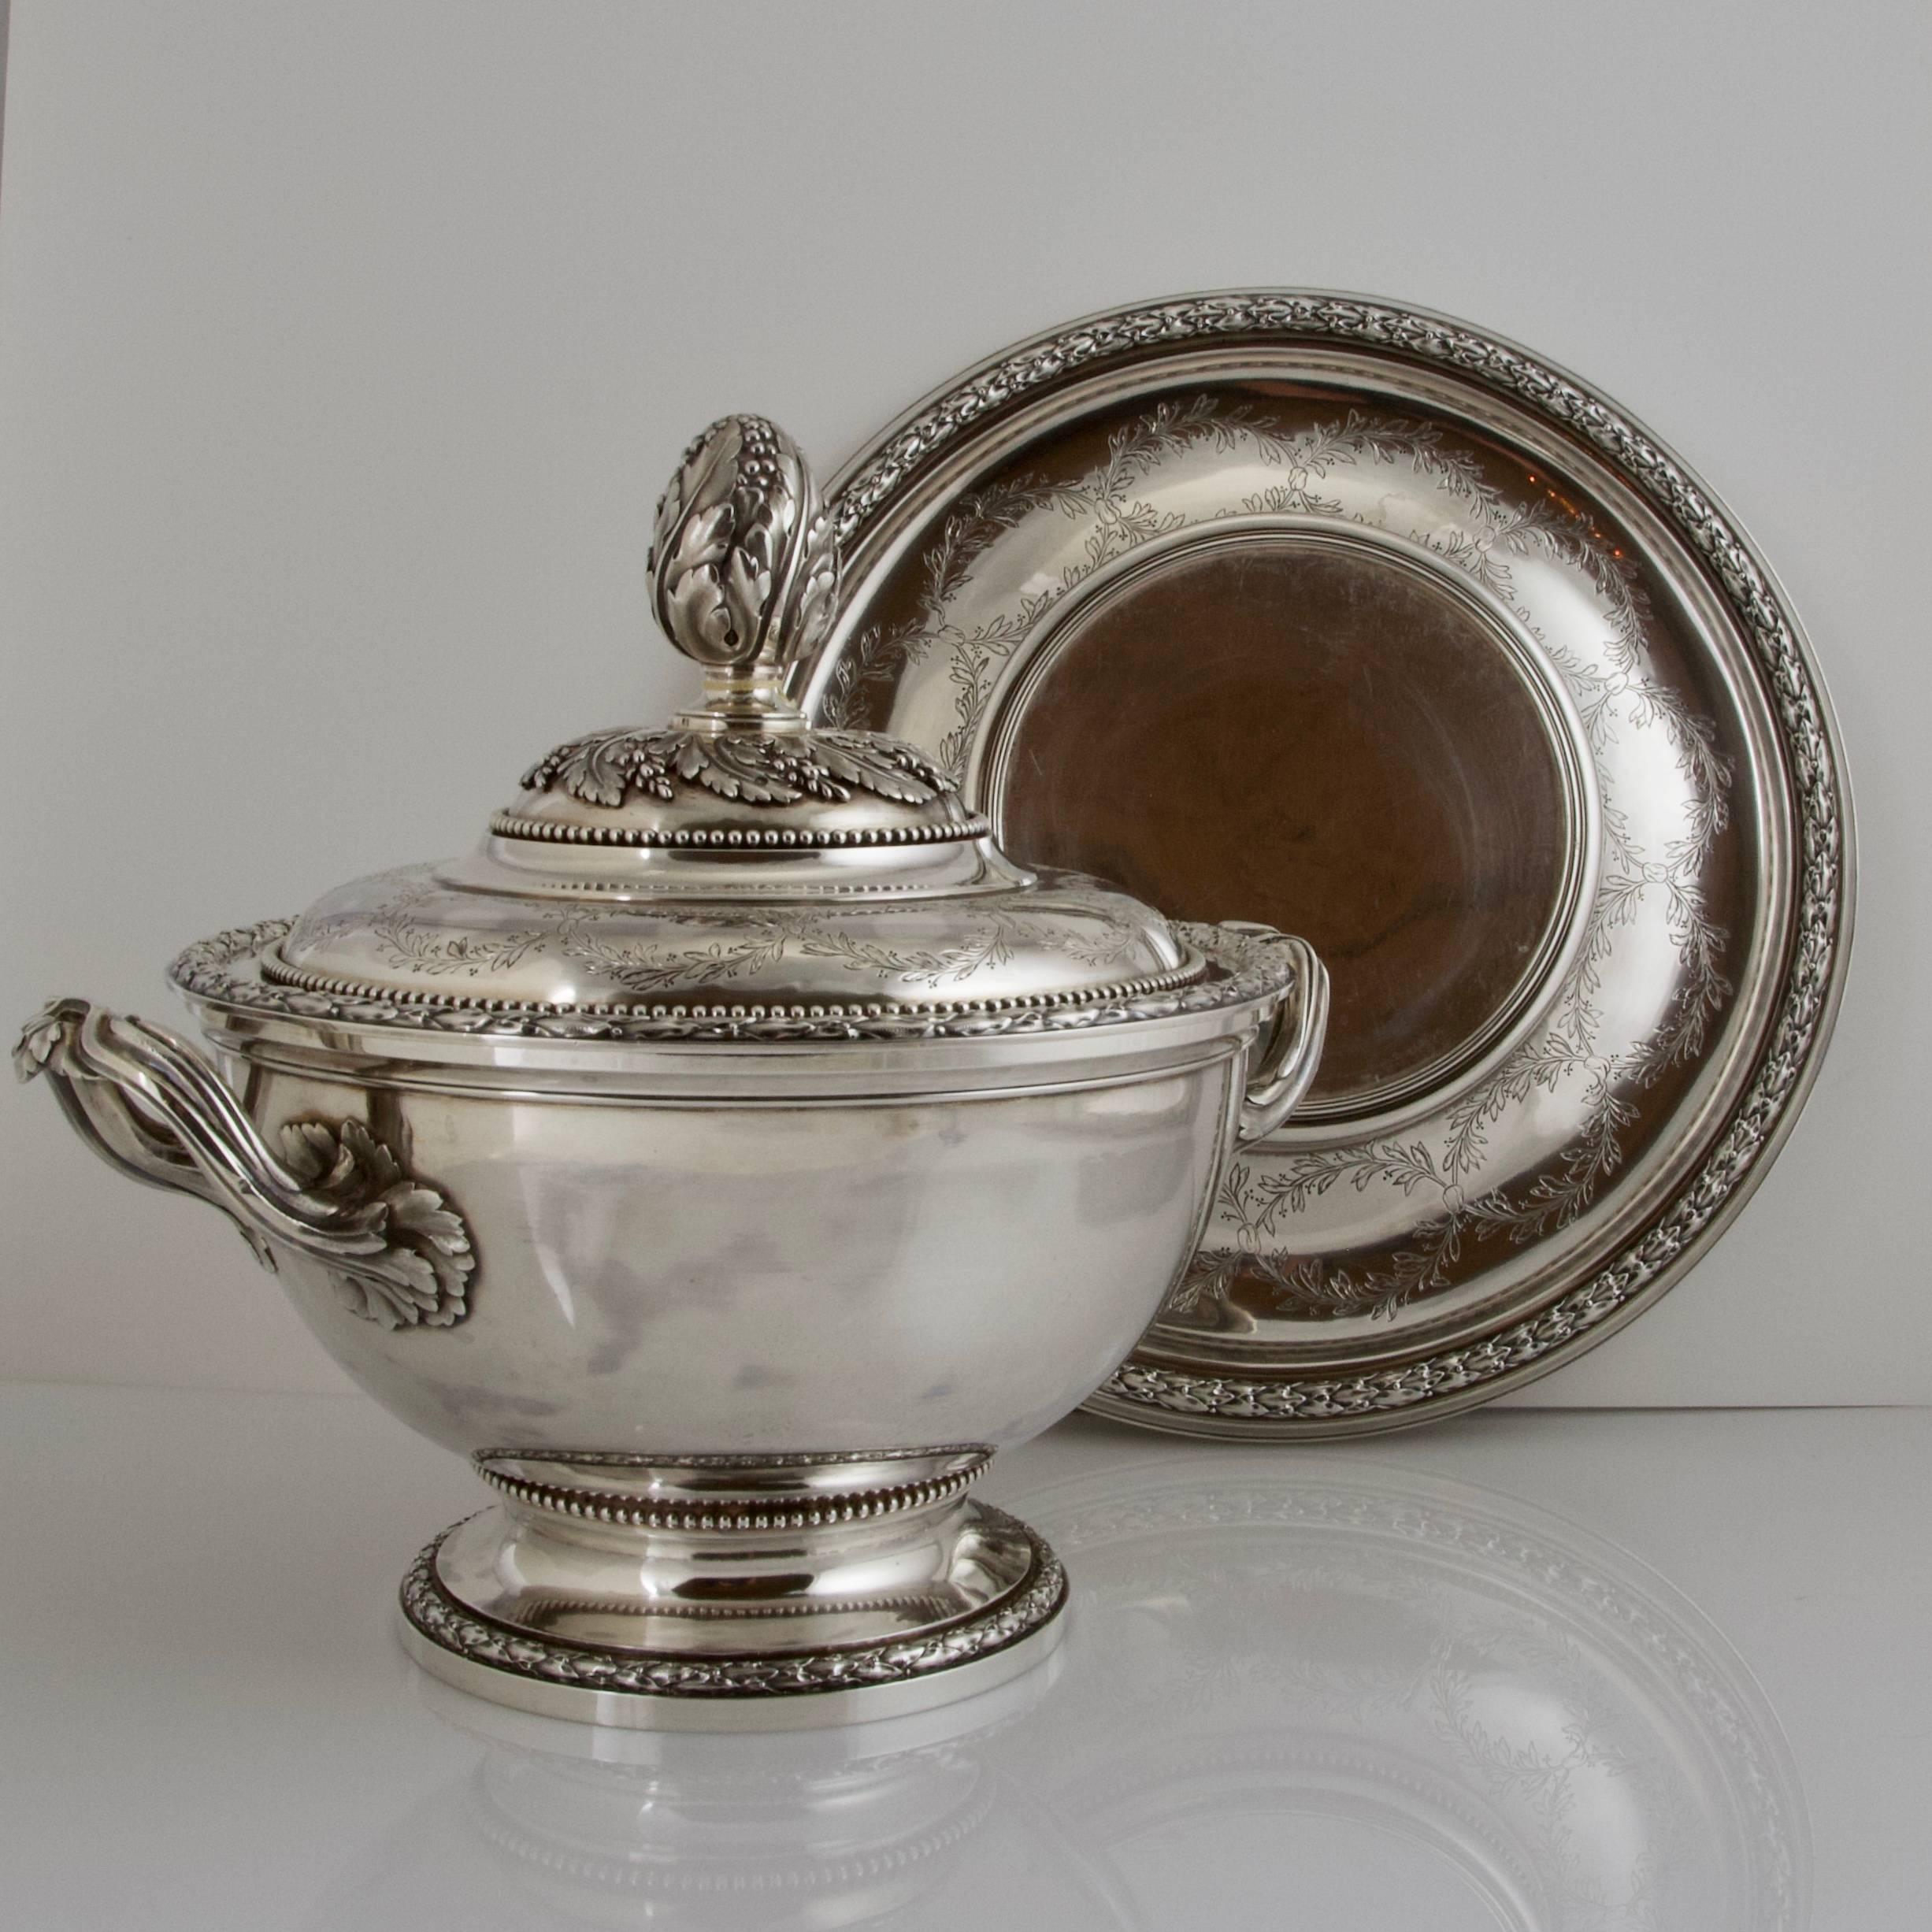 Polished and matte, engraved and chiseled, fused and welded, hammered, alls the silversmith's technique in an unusual round pot à oille comprising a soup tureen, its cover and its matching stand. Totally in french sterling silver 950.
Each time,